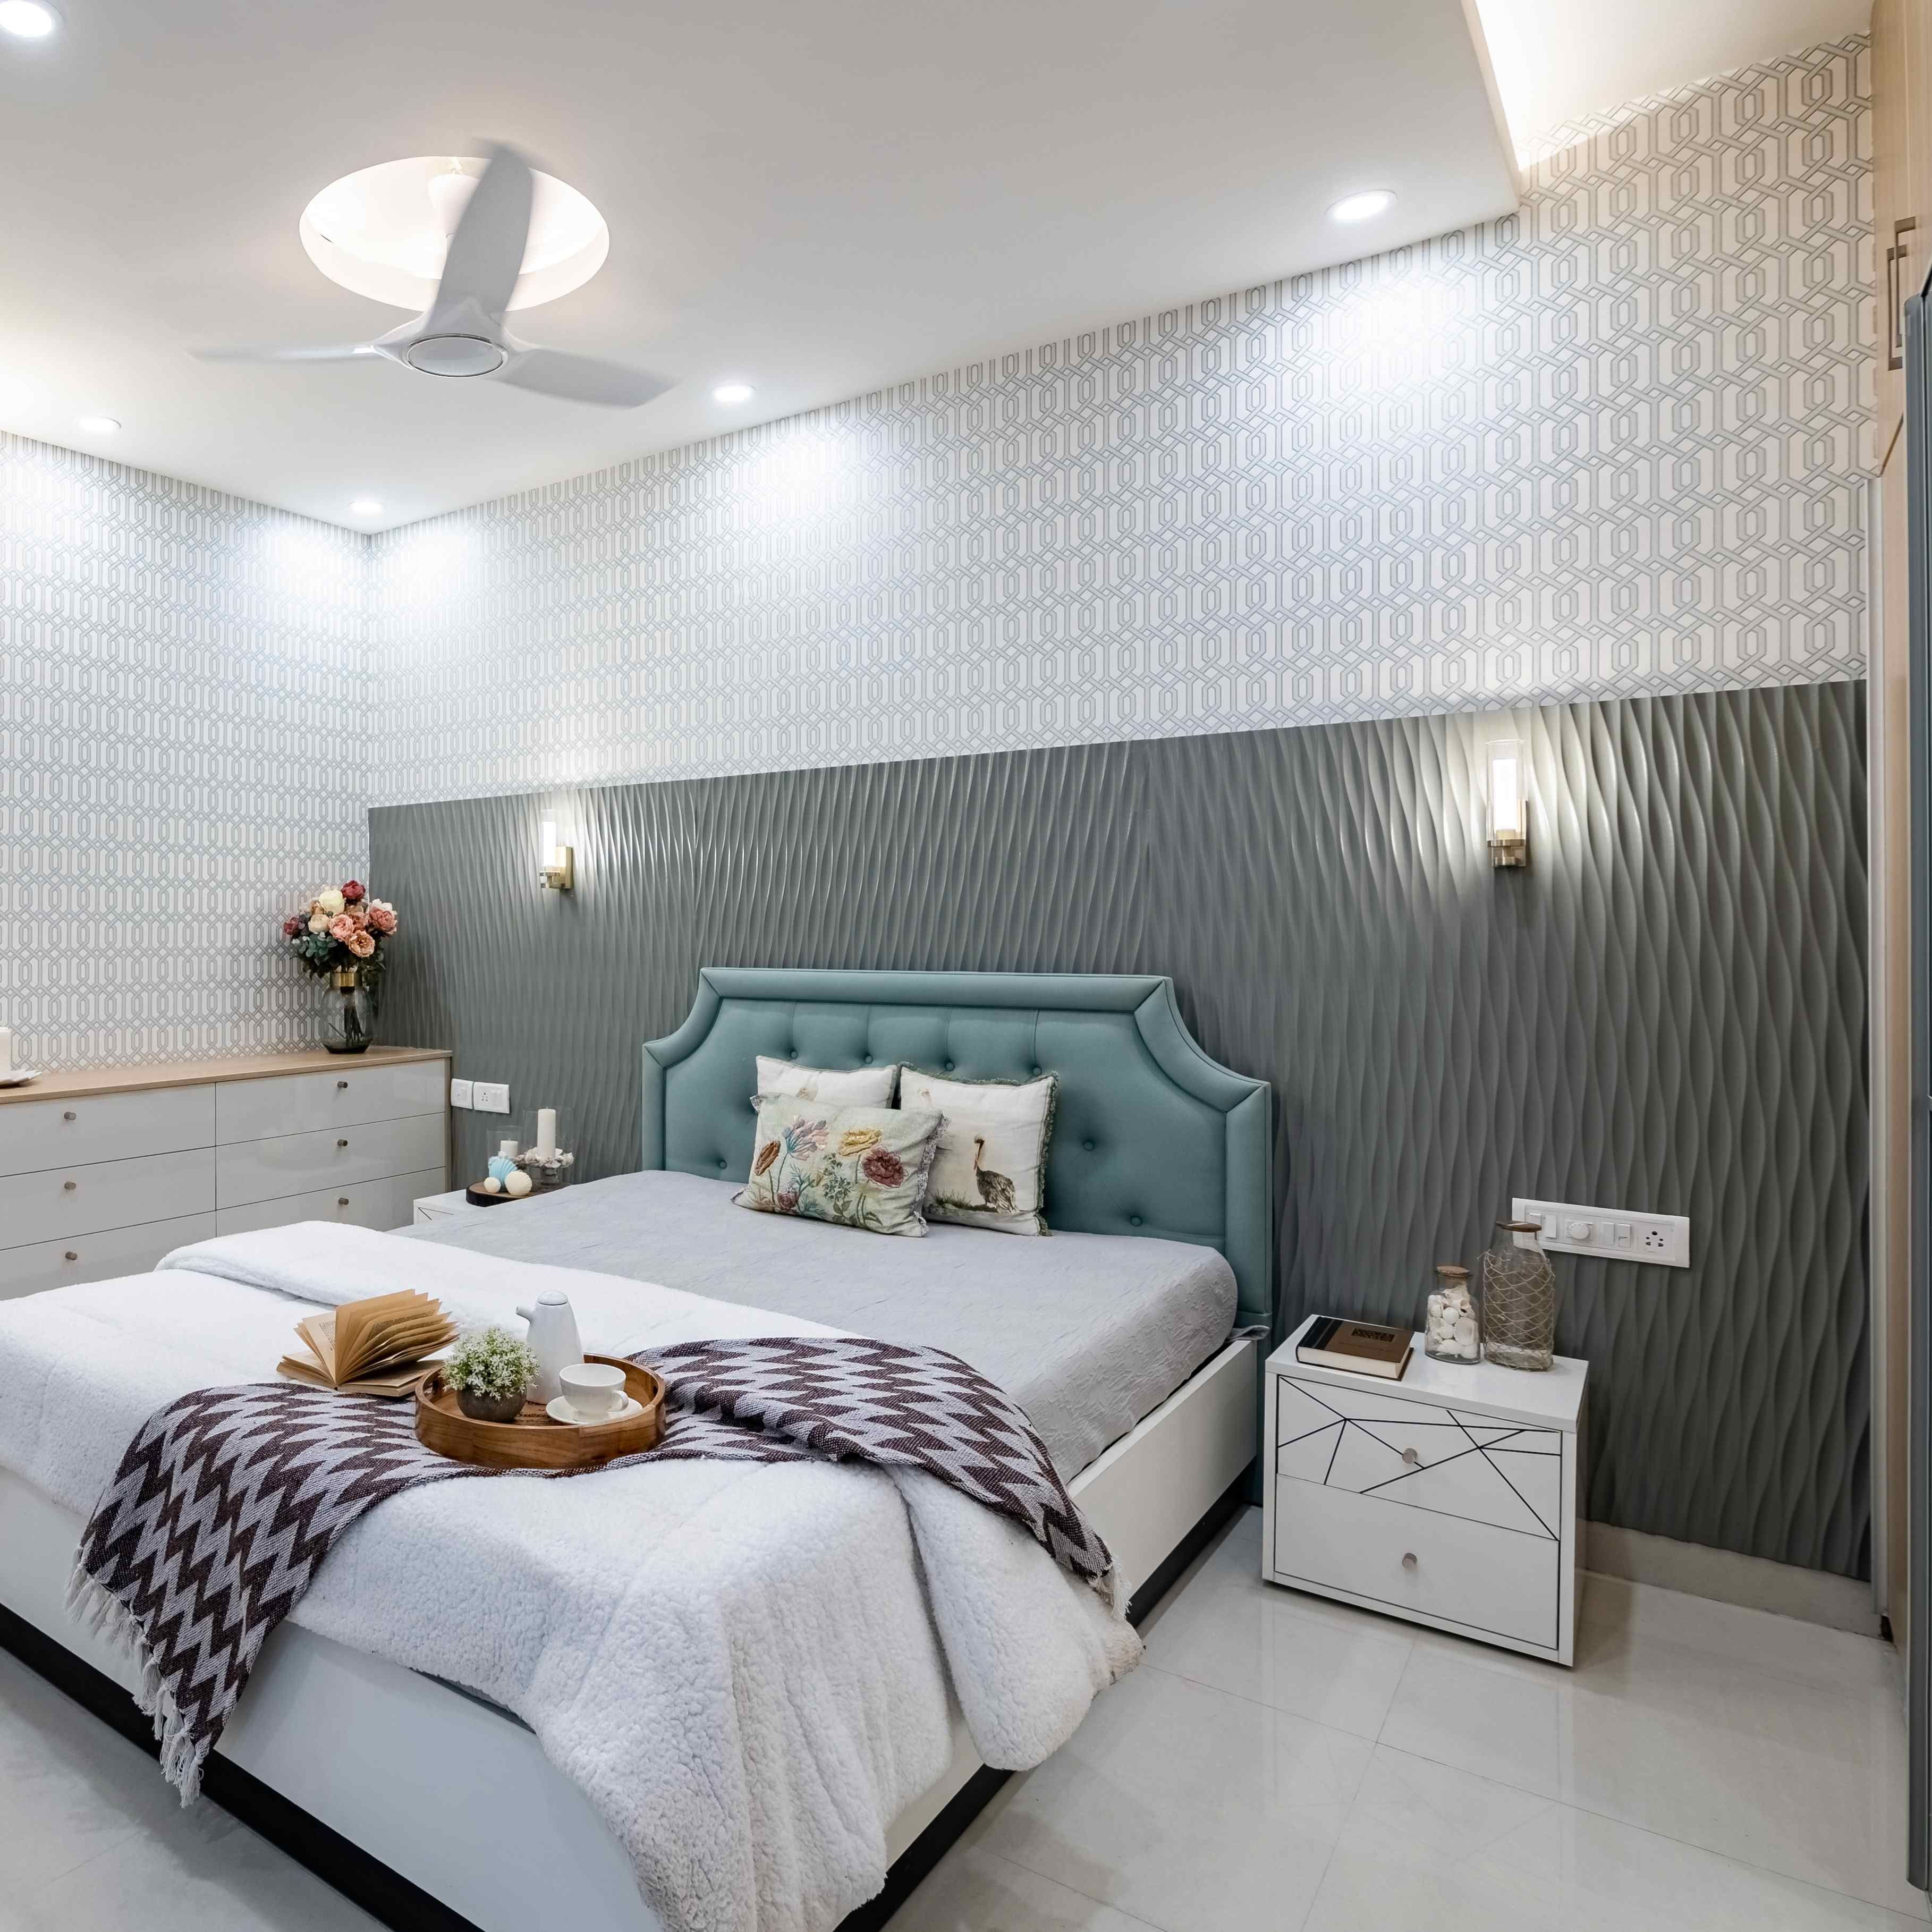 Contemporary White And Grey Bedroom Wall Design